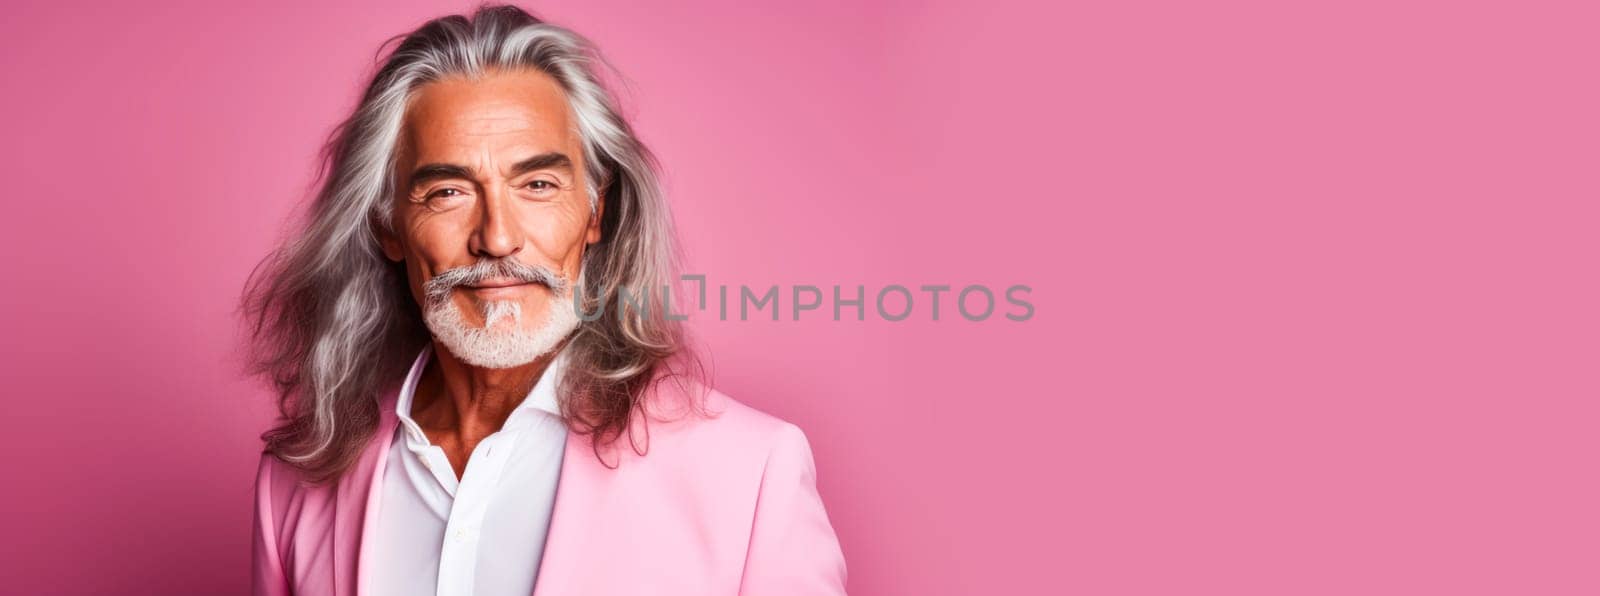 Handsome elderly Latino with long gray hair, on a pink background, banner. Advertising of cosmetic products, spa treatments, shampoos and hair care products, dentistry and medicine, perfumes and cosmetology for older men.